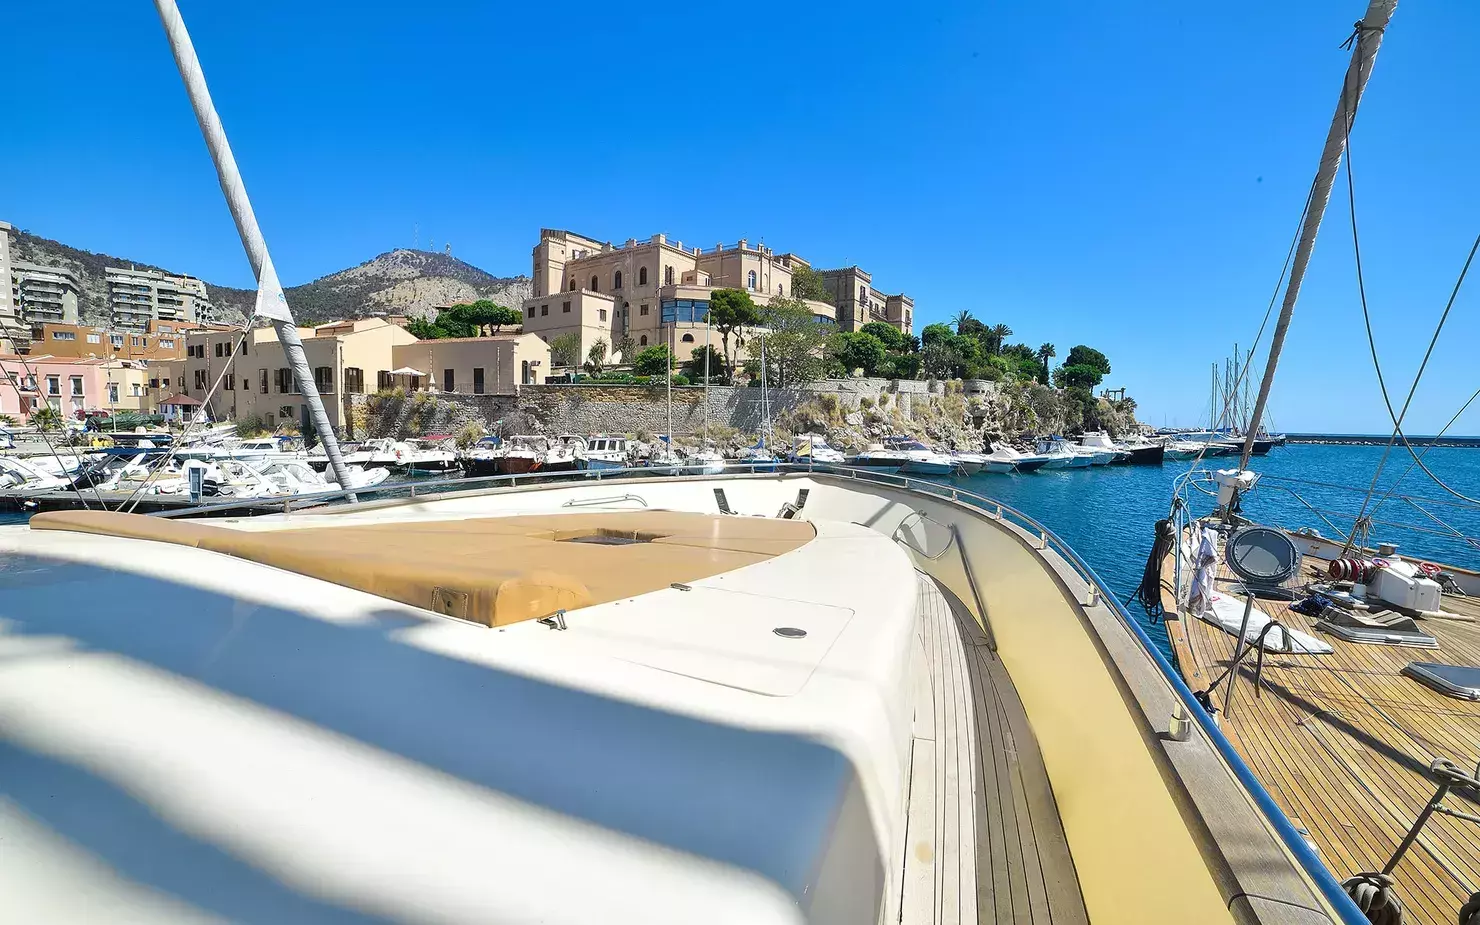 Andea by Tecnomar - Top rates for a Charter of a private Motor Yacht in Malta